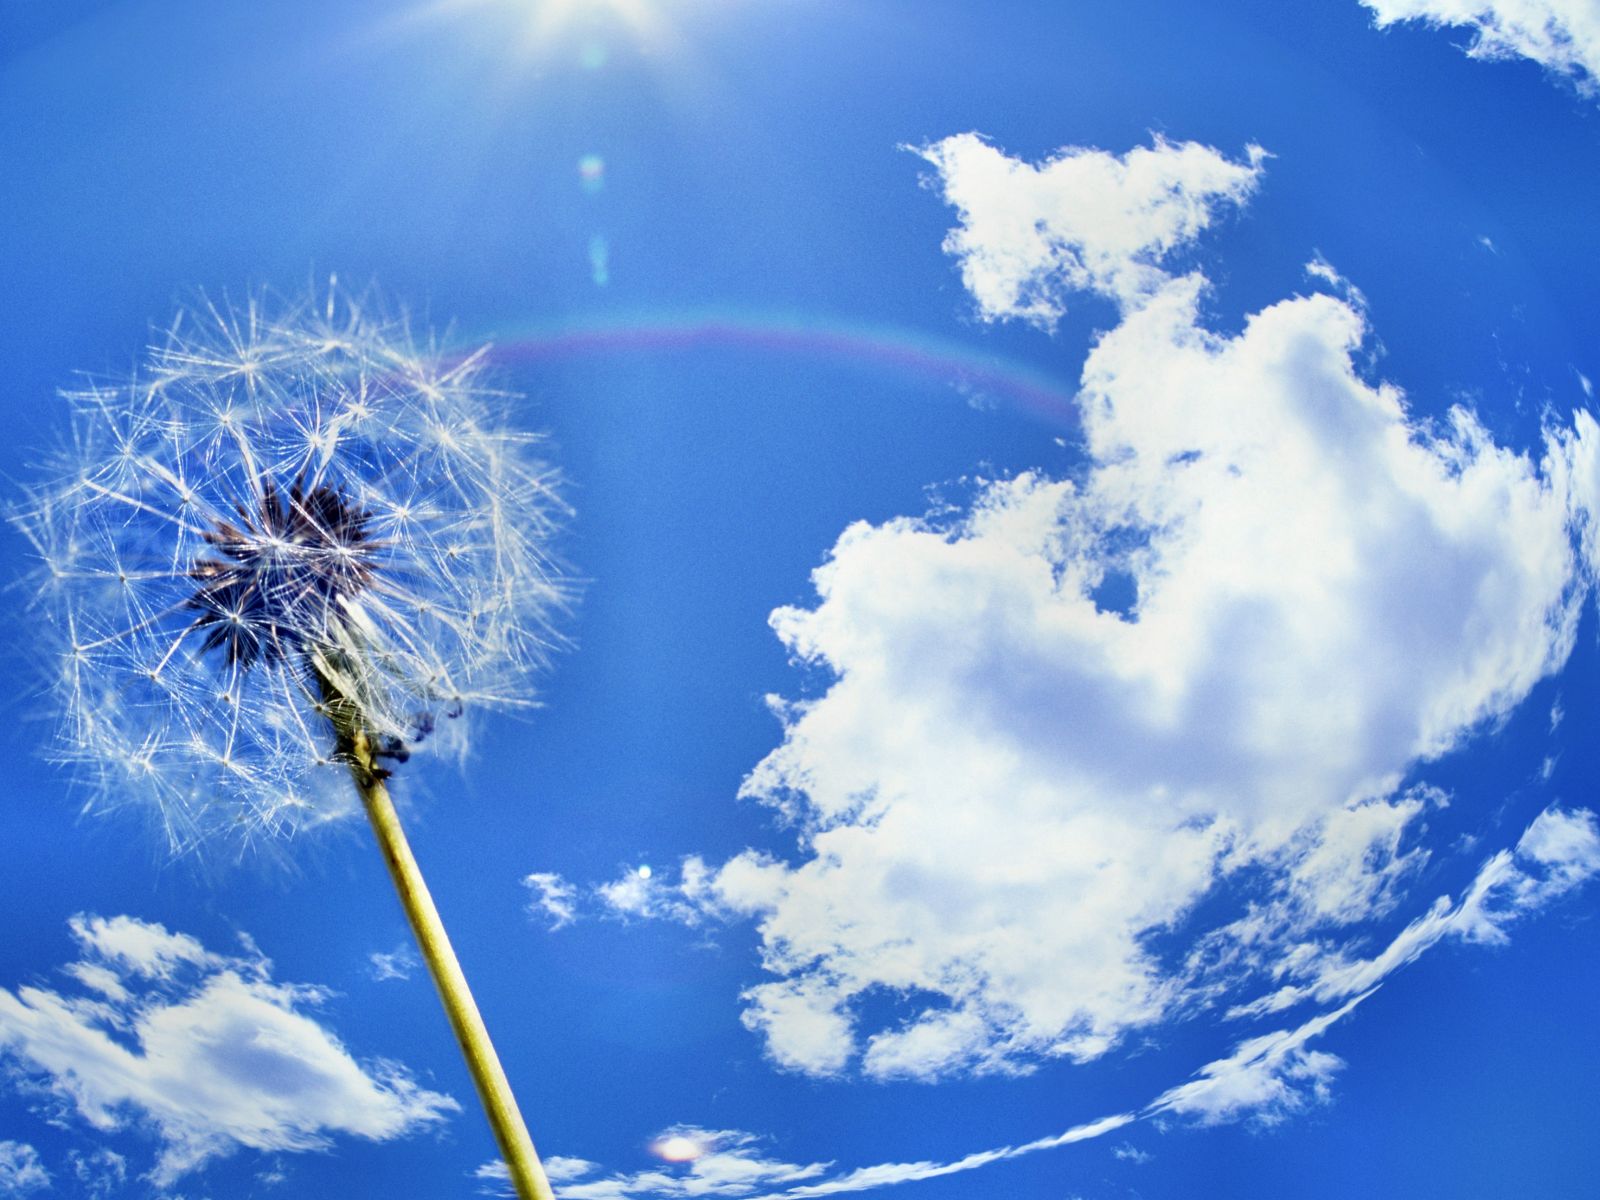 Backgrounds Windows 7 Dandelion Wallpaper in high resolution for free